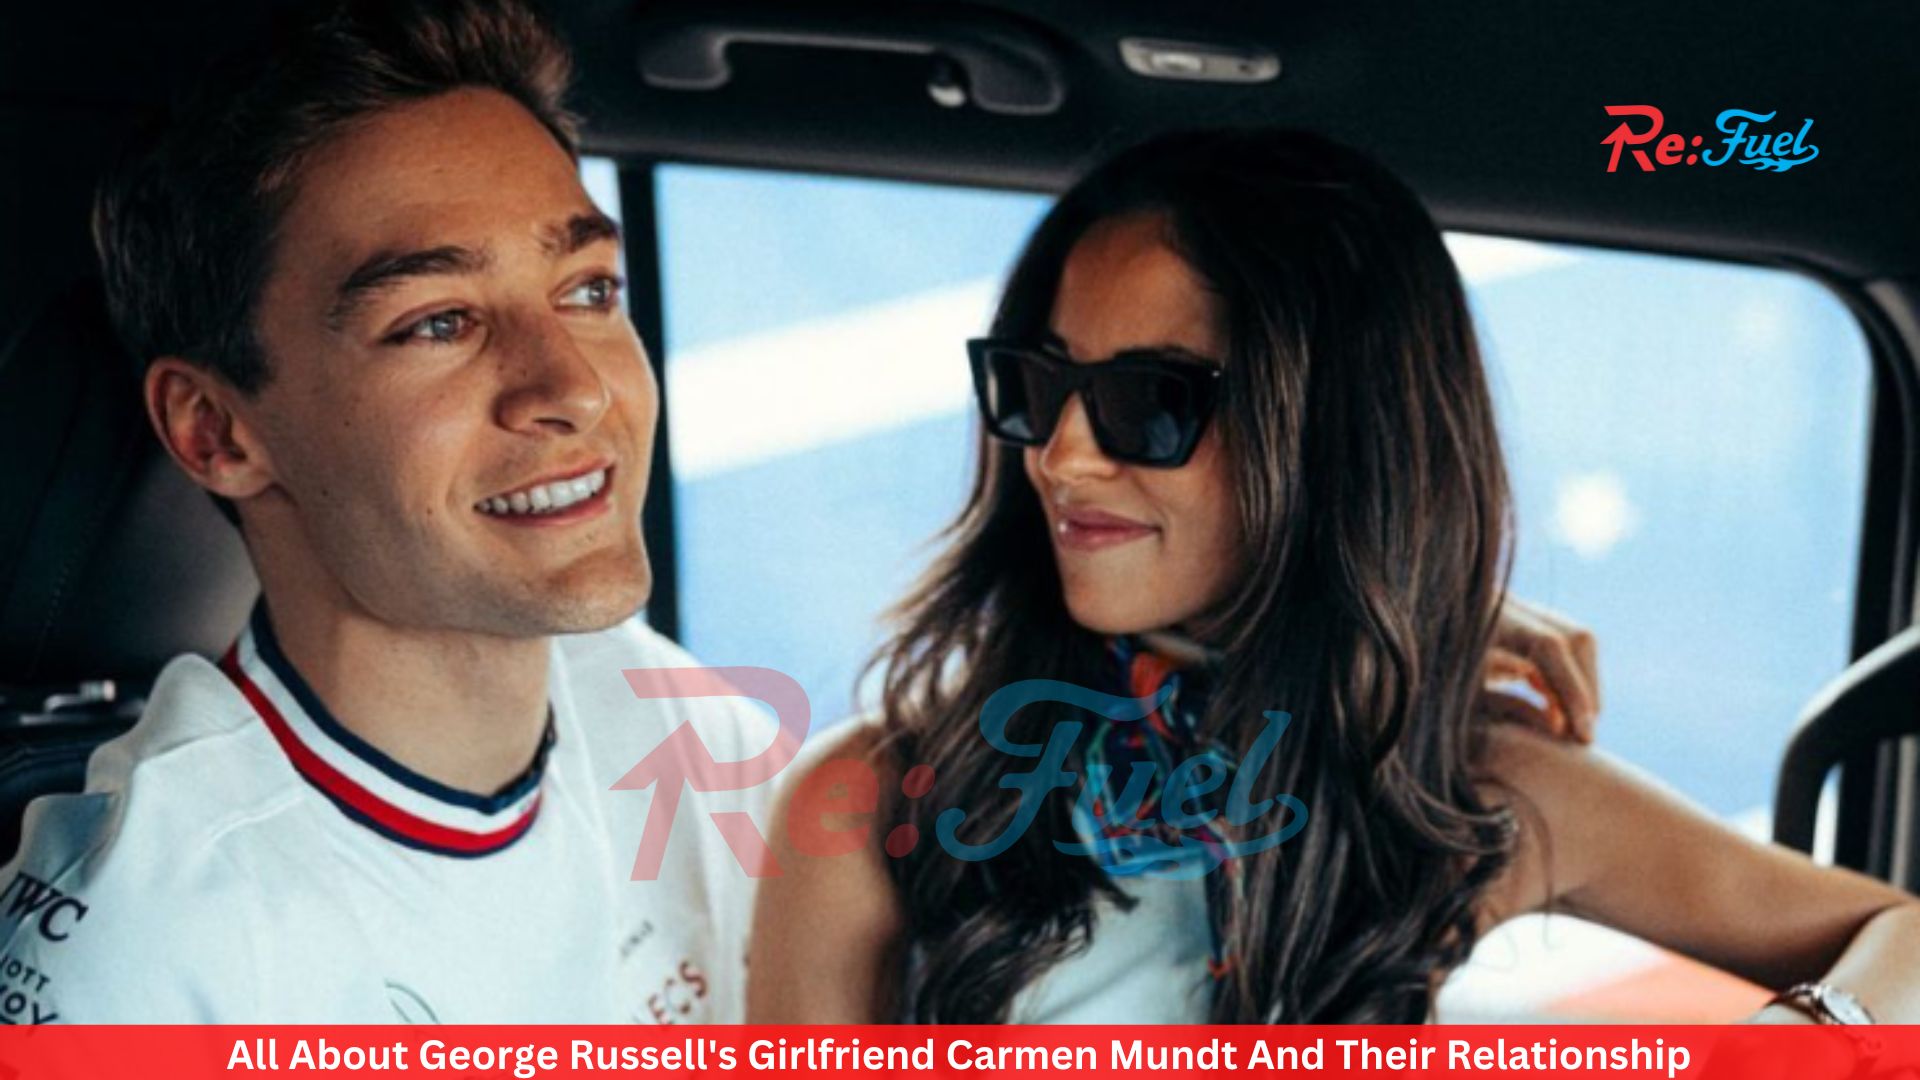 All About George Russell's Girlfriend Carmen Mundt And Their Relationship